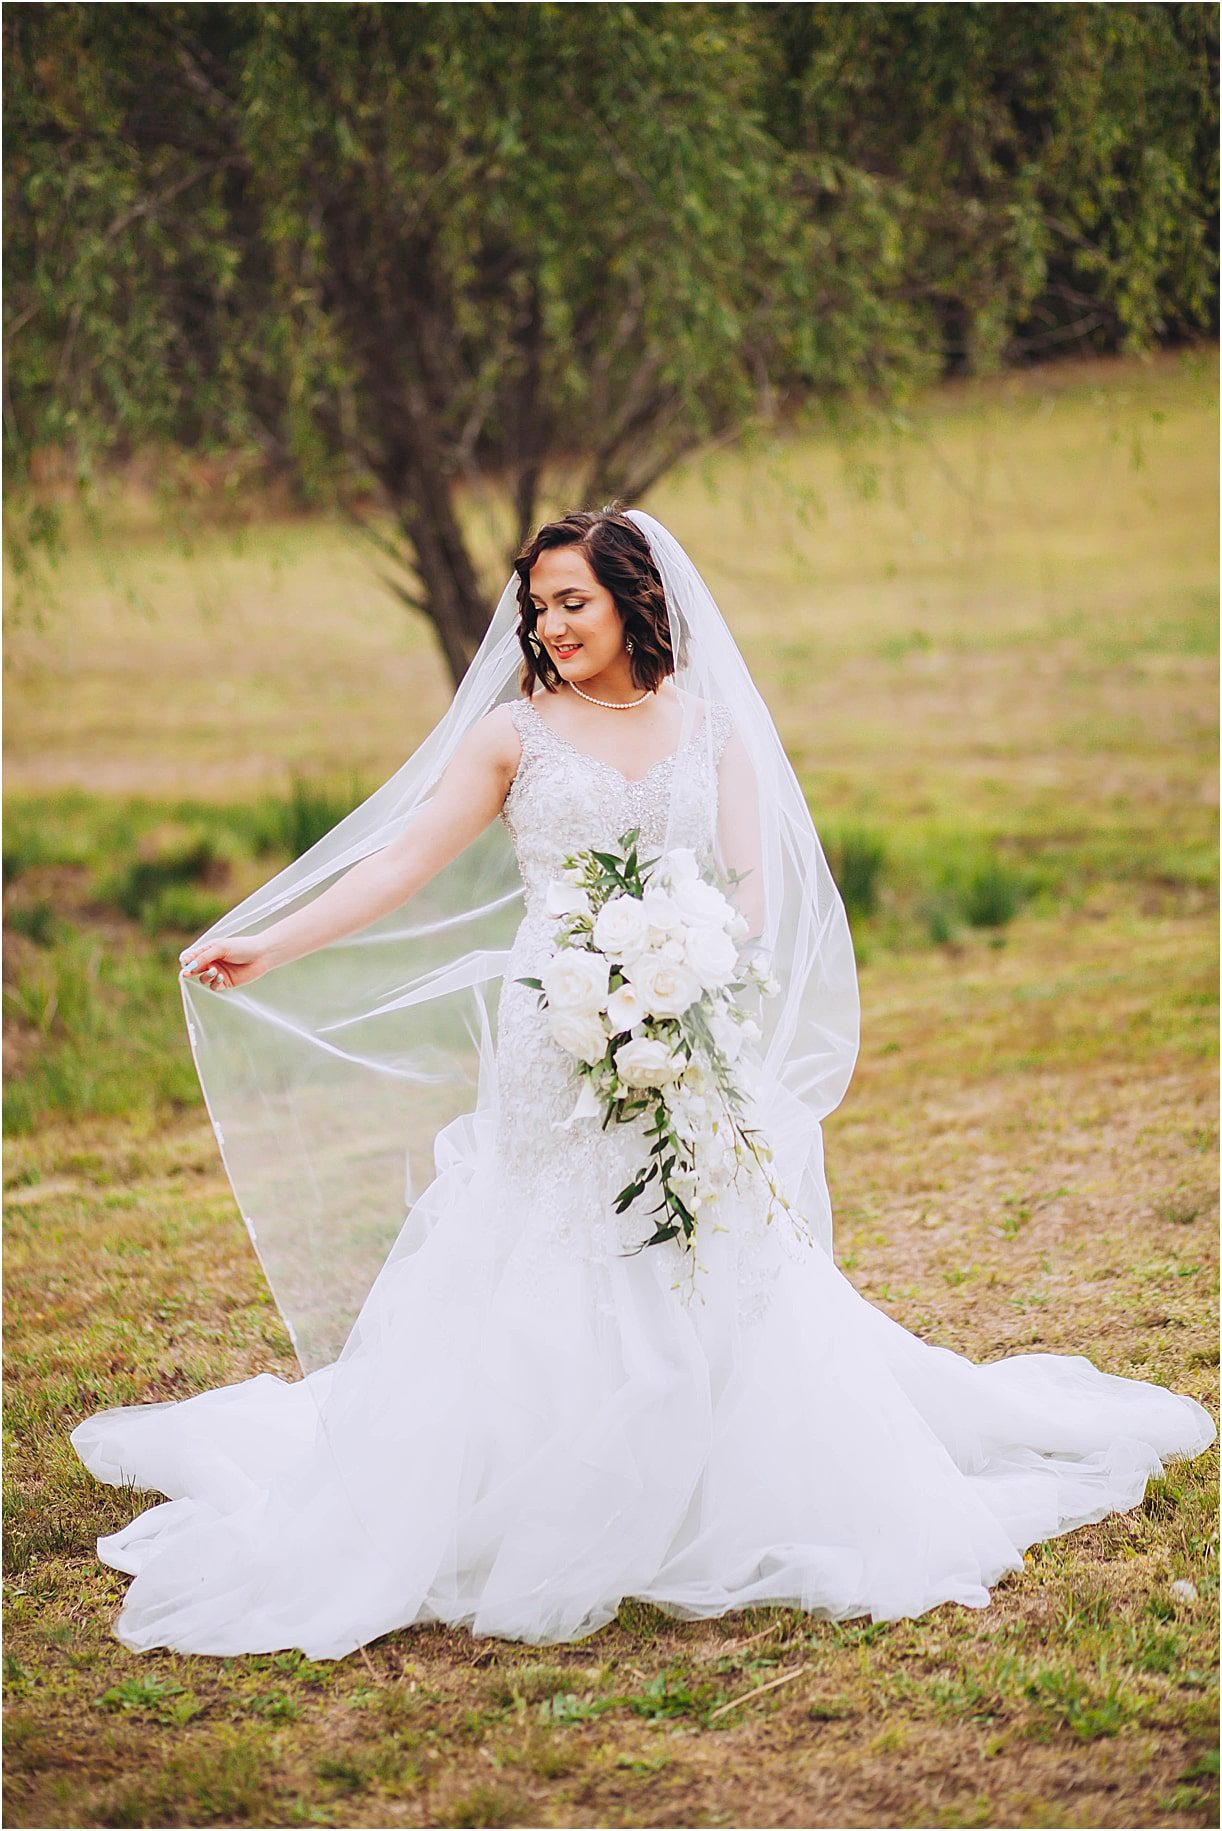 Intimate Ceremony During Covid-19 | Hill City Bride Virginia Weddings Dress Gown